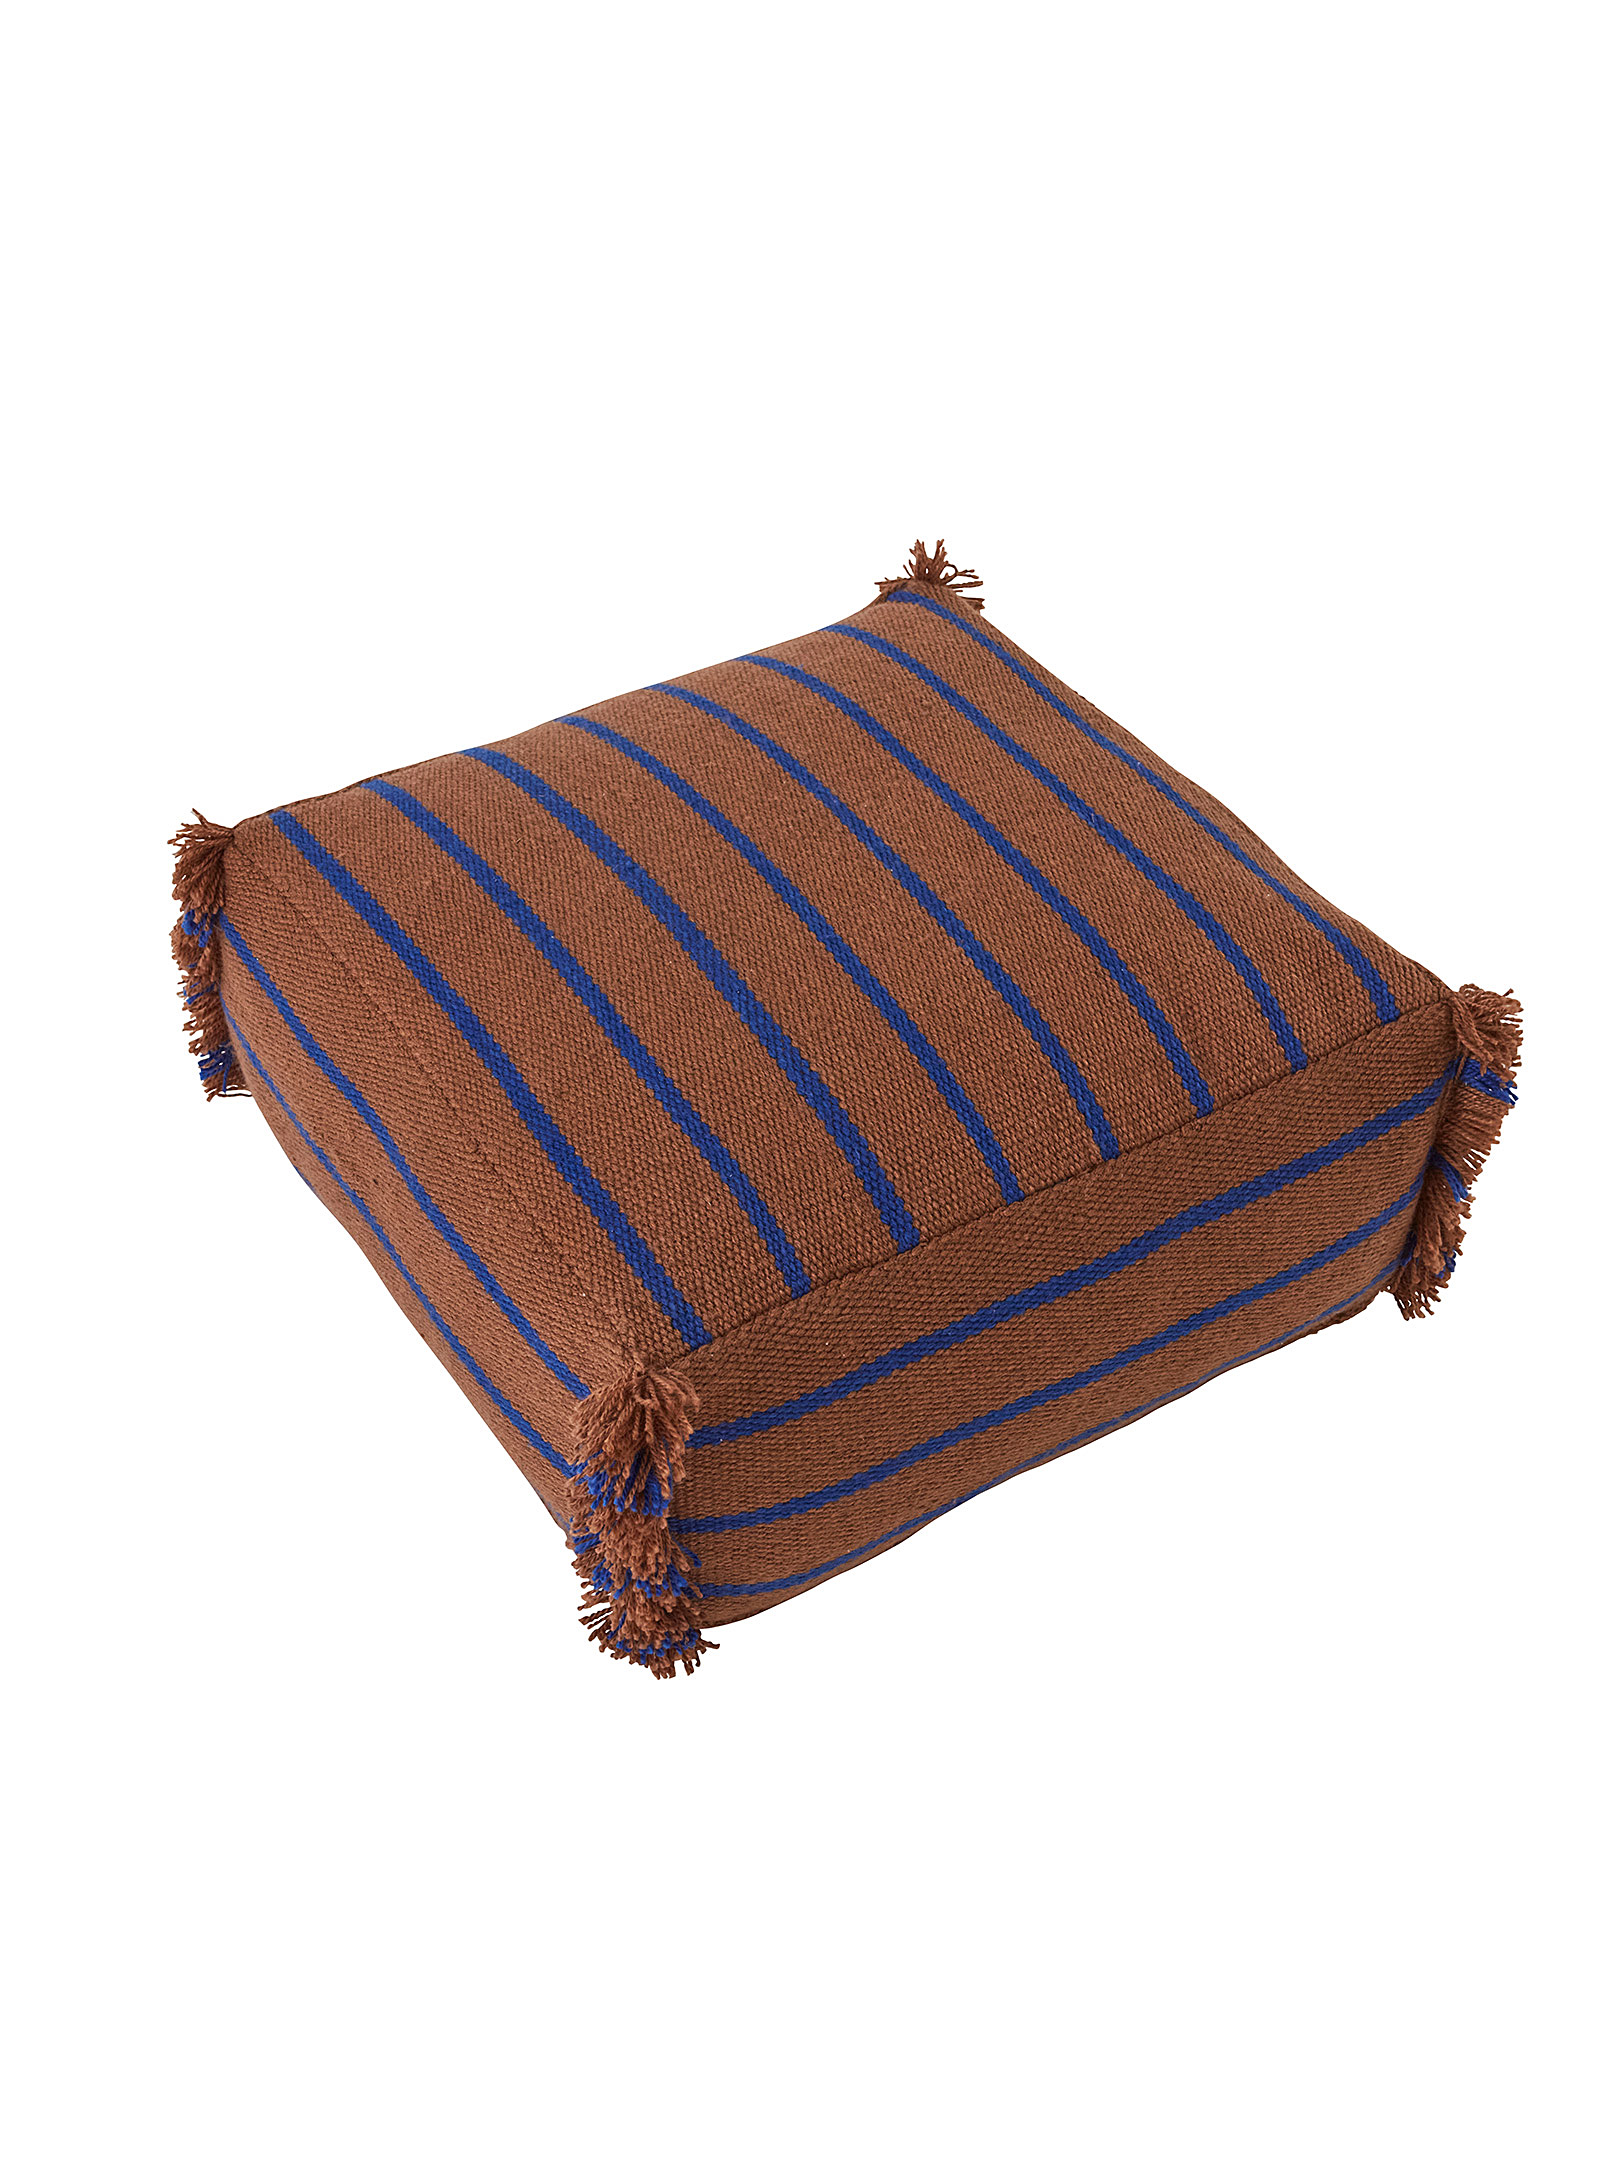 Oyoy Living Design Contrasting Stripes Square Pouf In Medium Brown